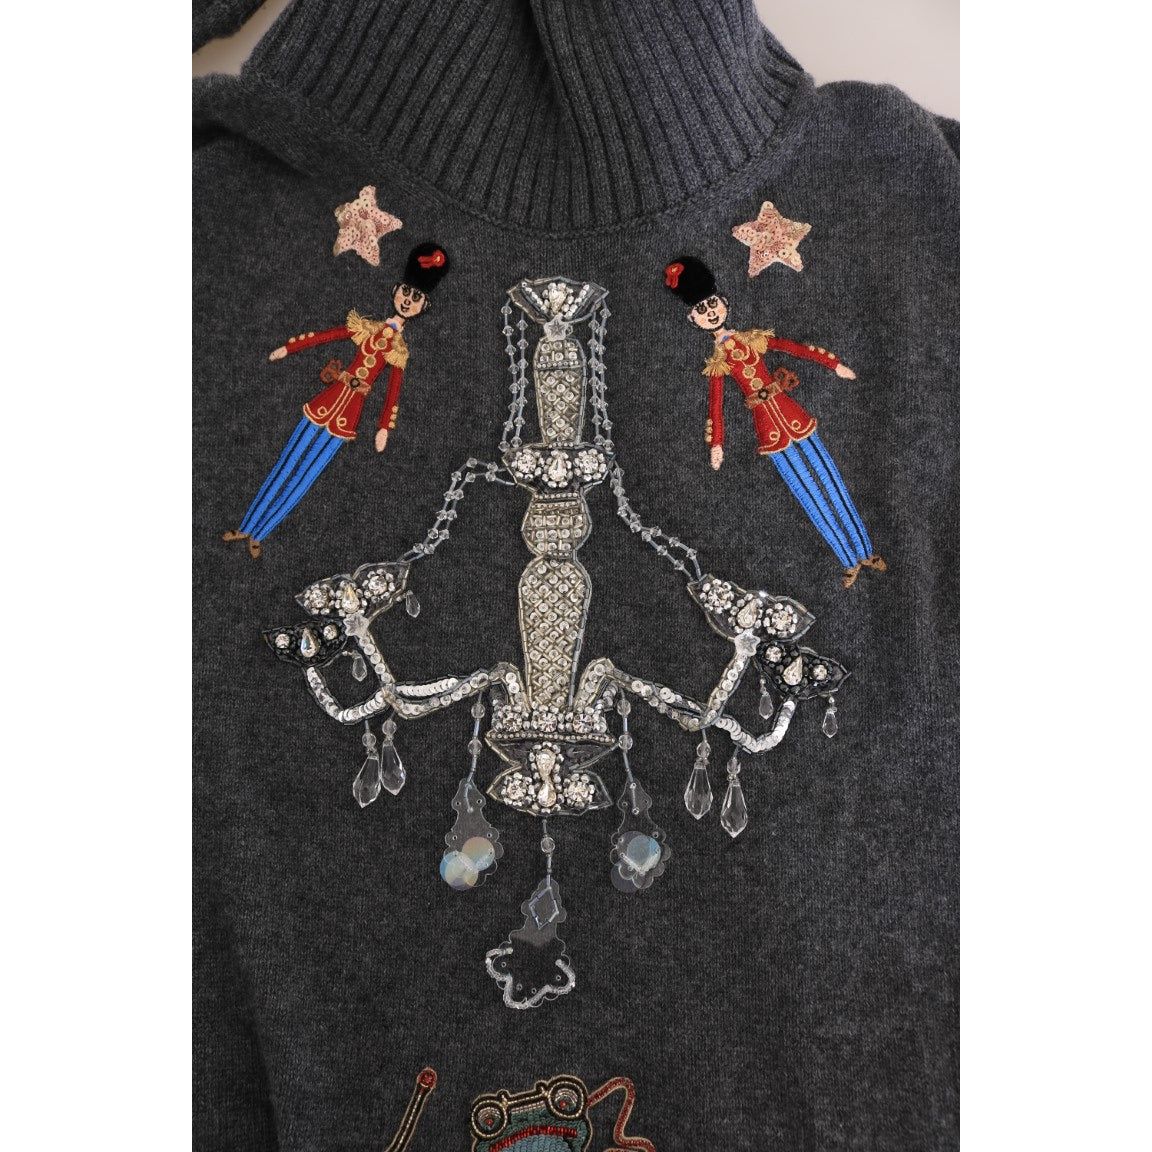 Dolce & Gabbana Enchanted Crystal Turtleneck Sweater fairy-tale-crystal-gray-cashmere-sweater 541660-fairy-tale-crystal-gray-cashmere-sweater-3.jpg